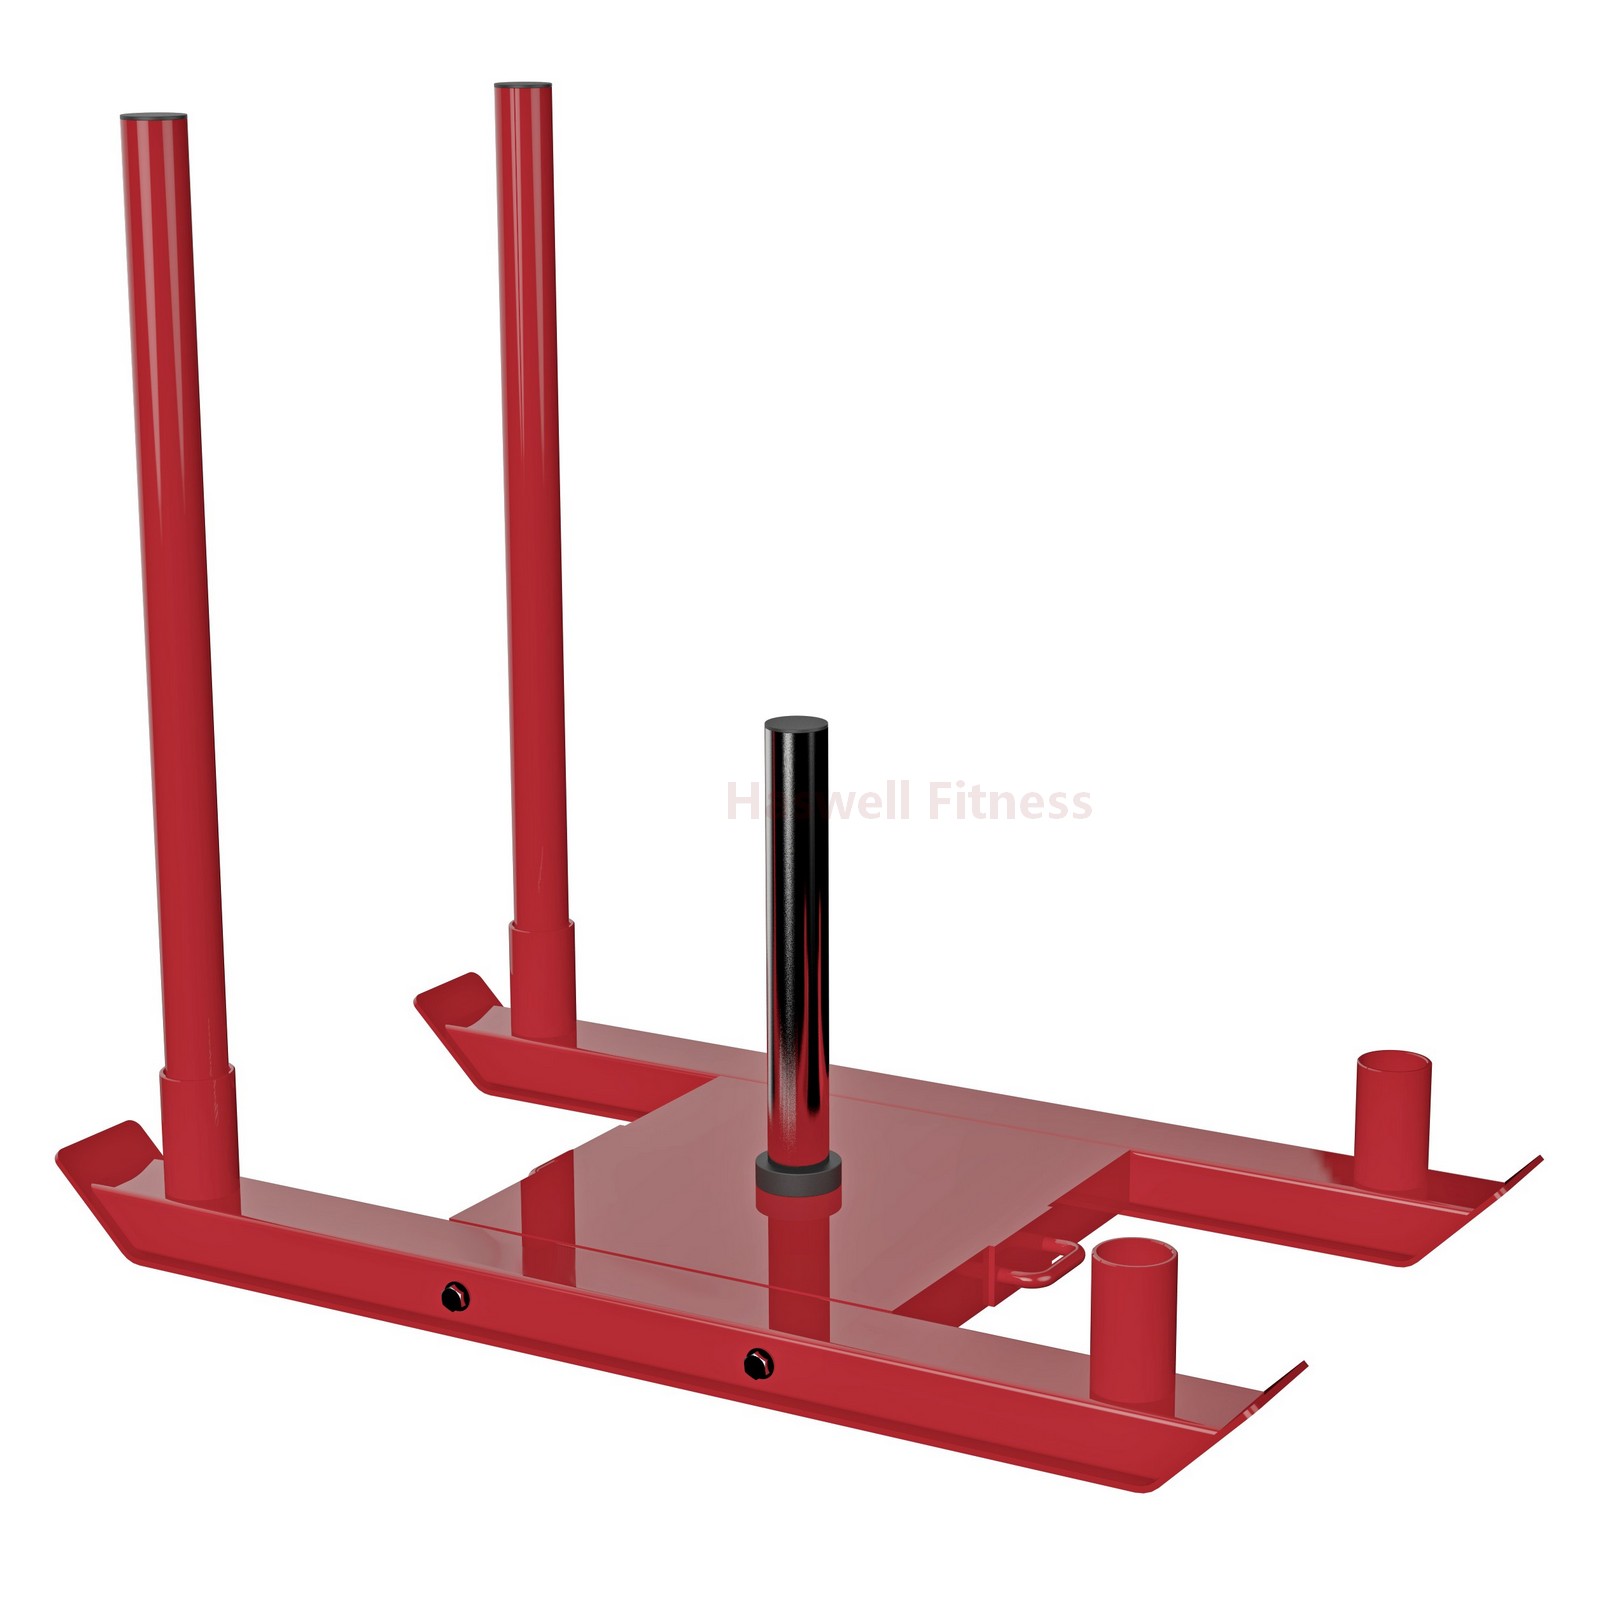 NH-191-4A Sled Gym Machine from China Haswell